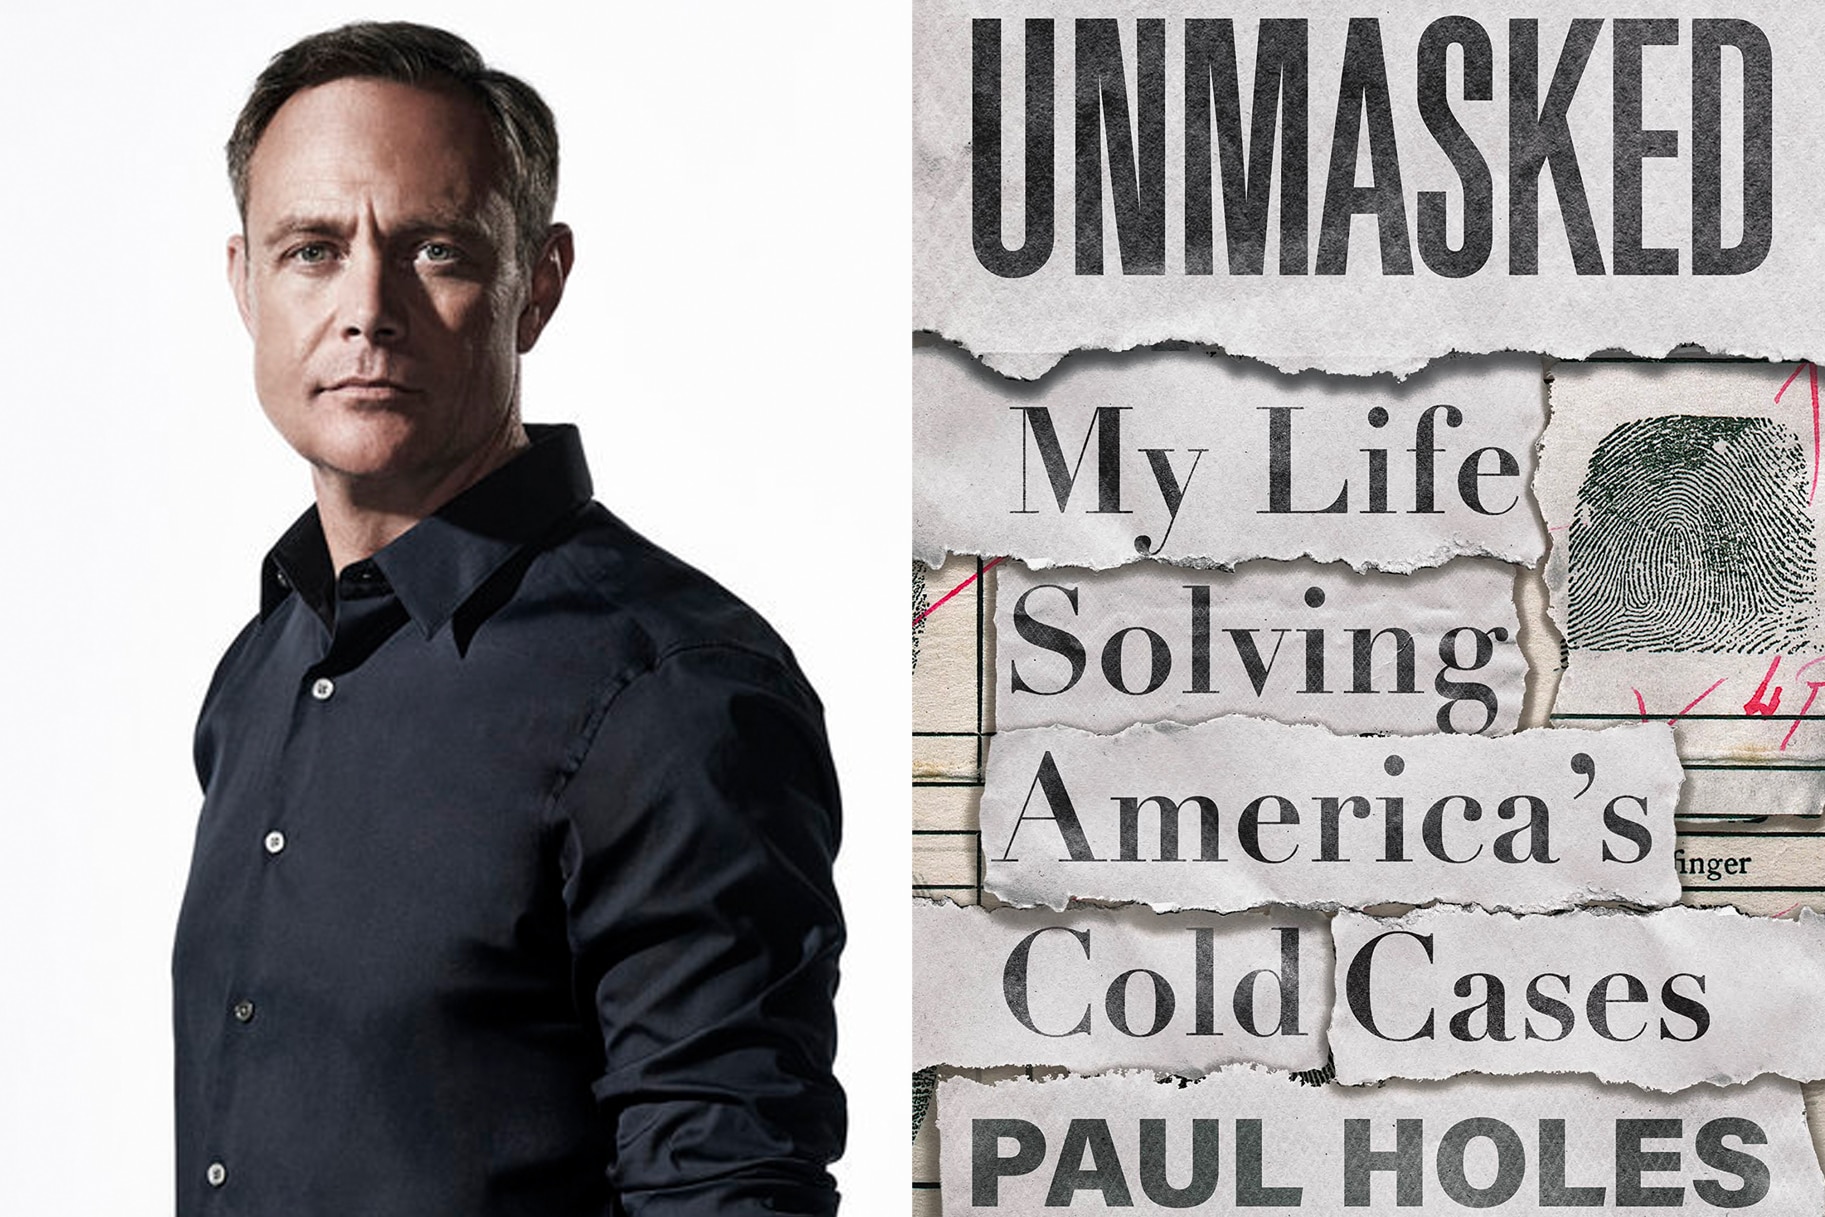 Paul Holes and his book Unmasked: My Life Solving America's Cold Cases